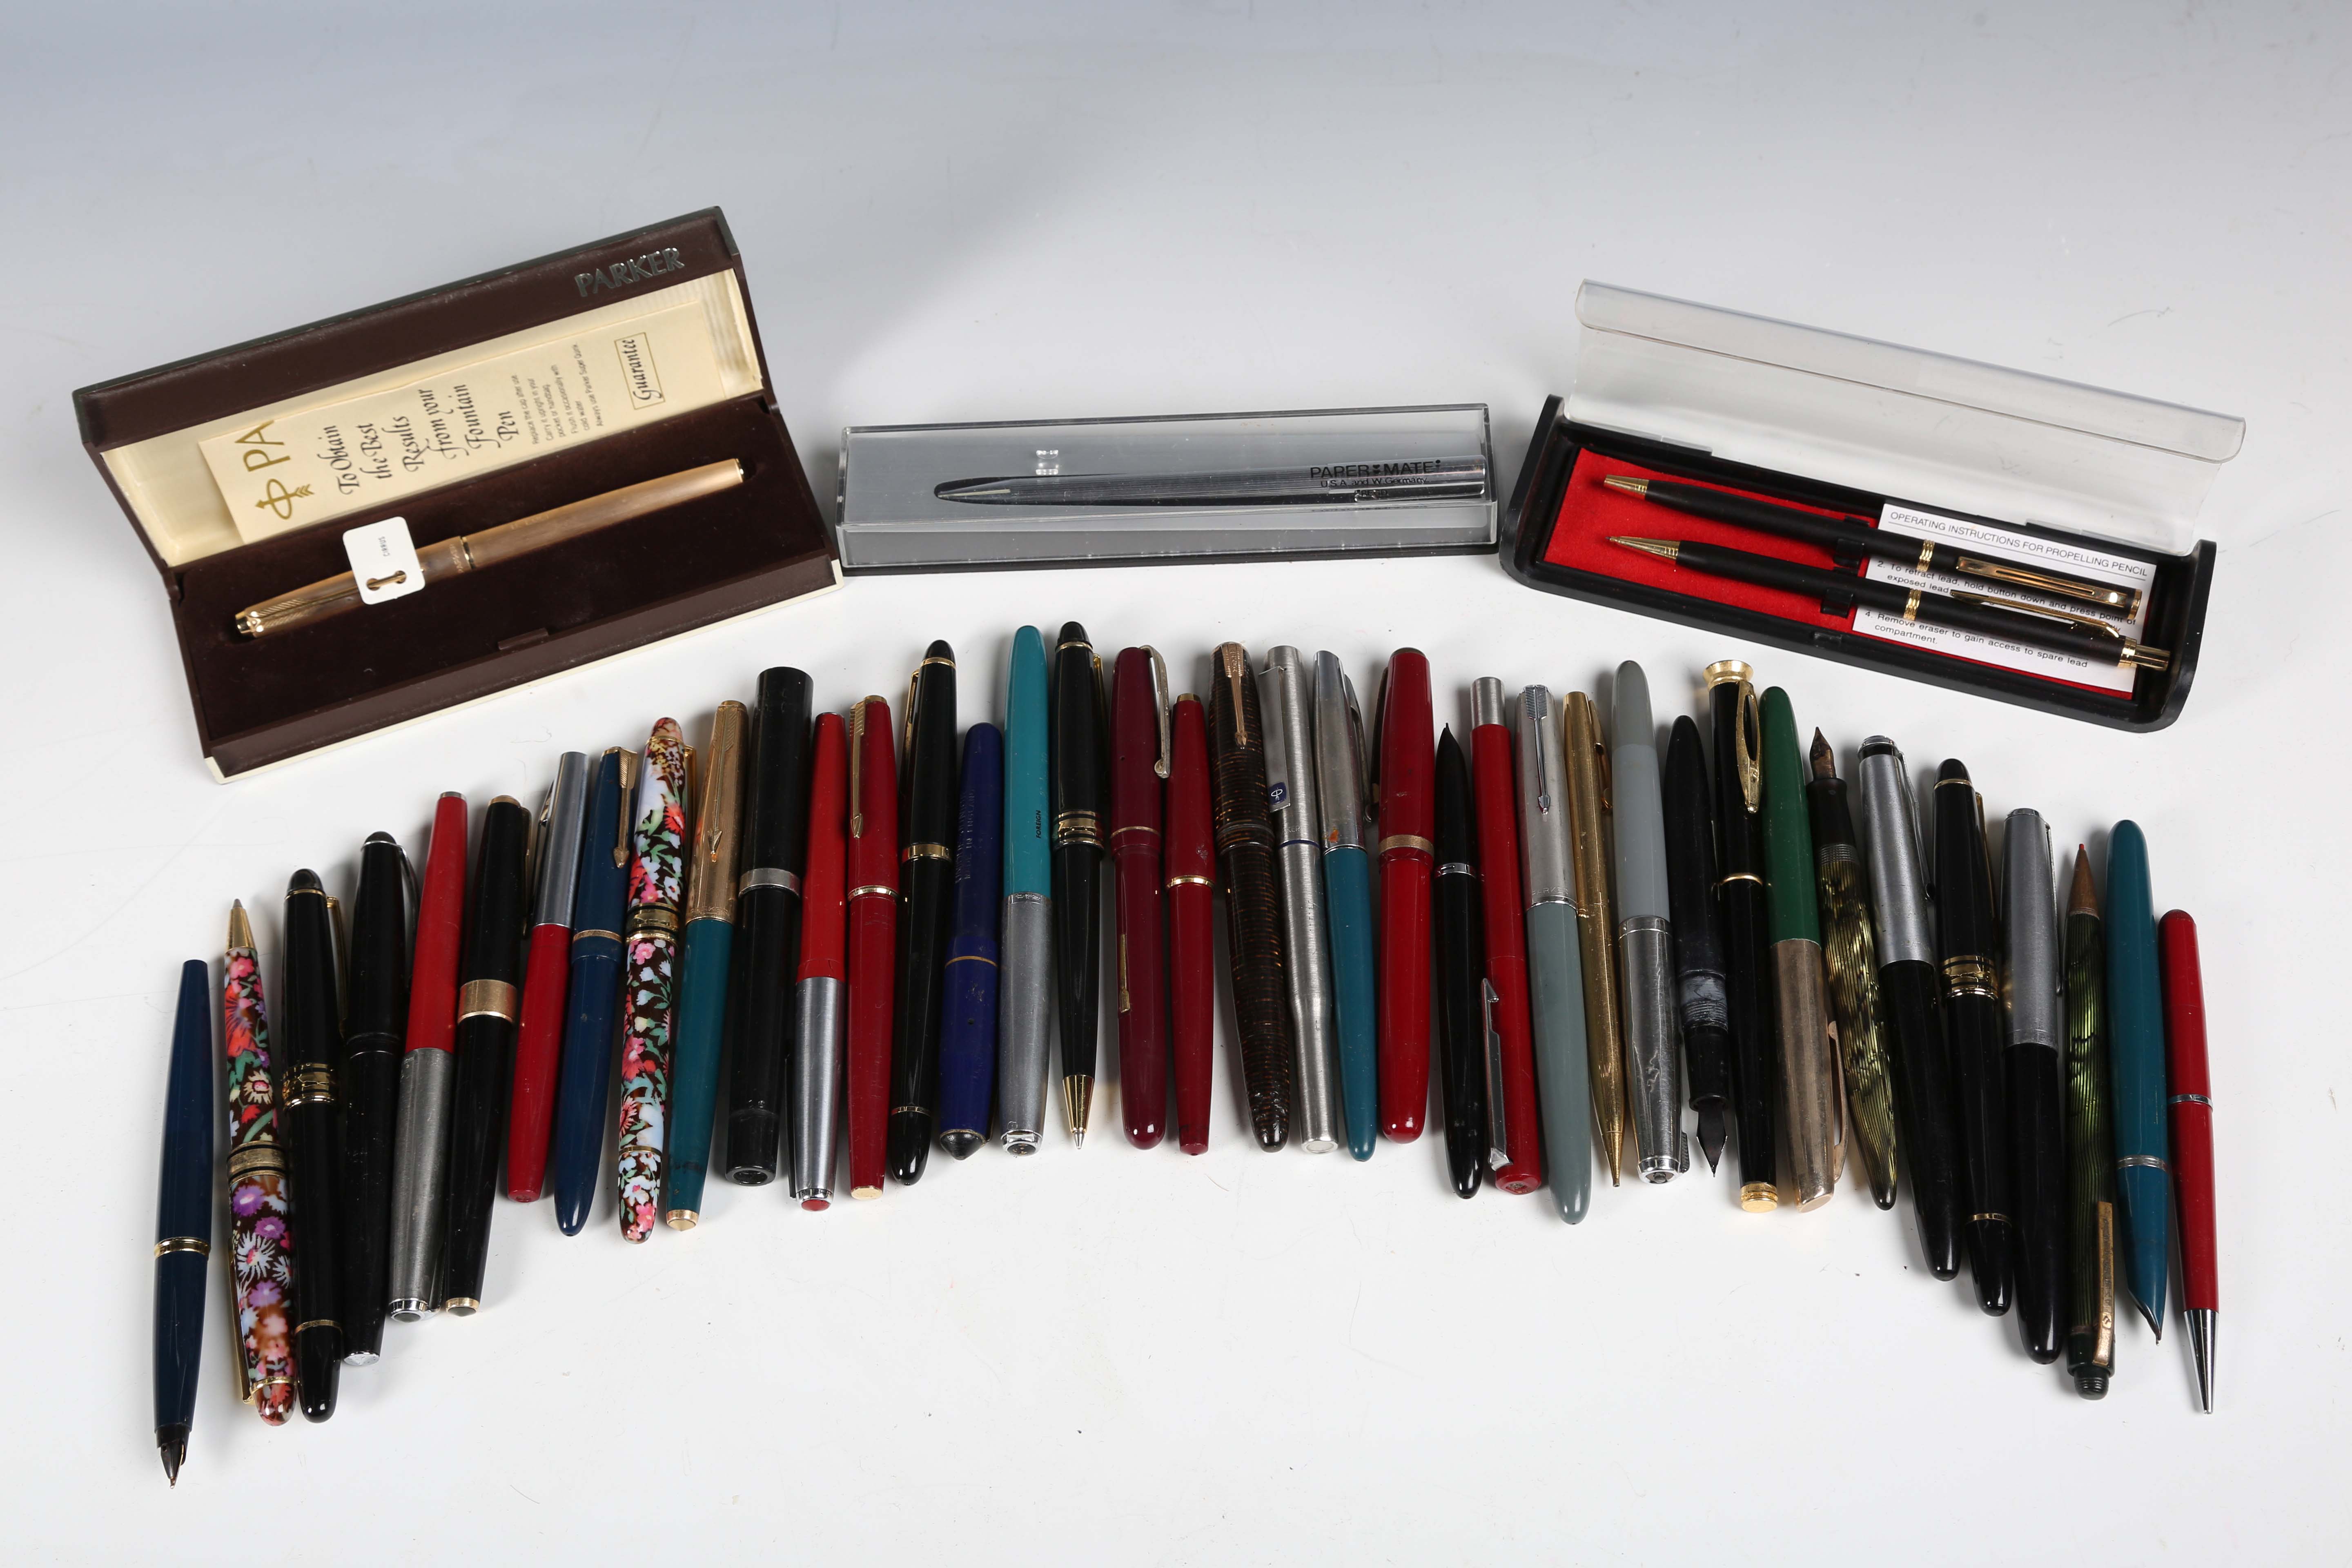 A collection of various fountain pens, ballpoints and pencils, including a Parker Duofold with